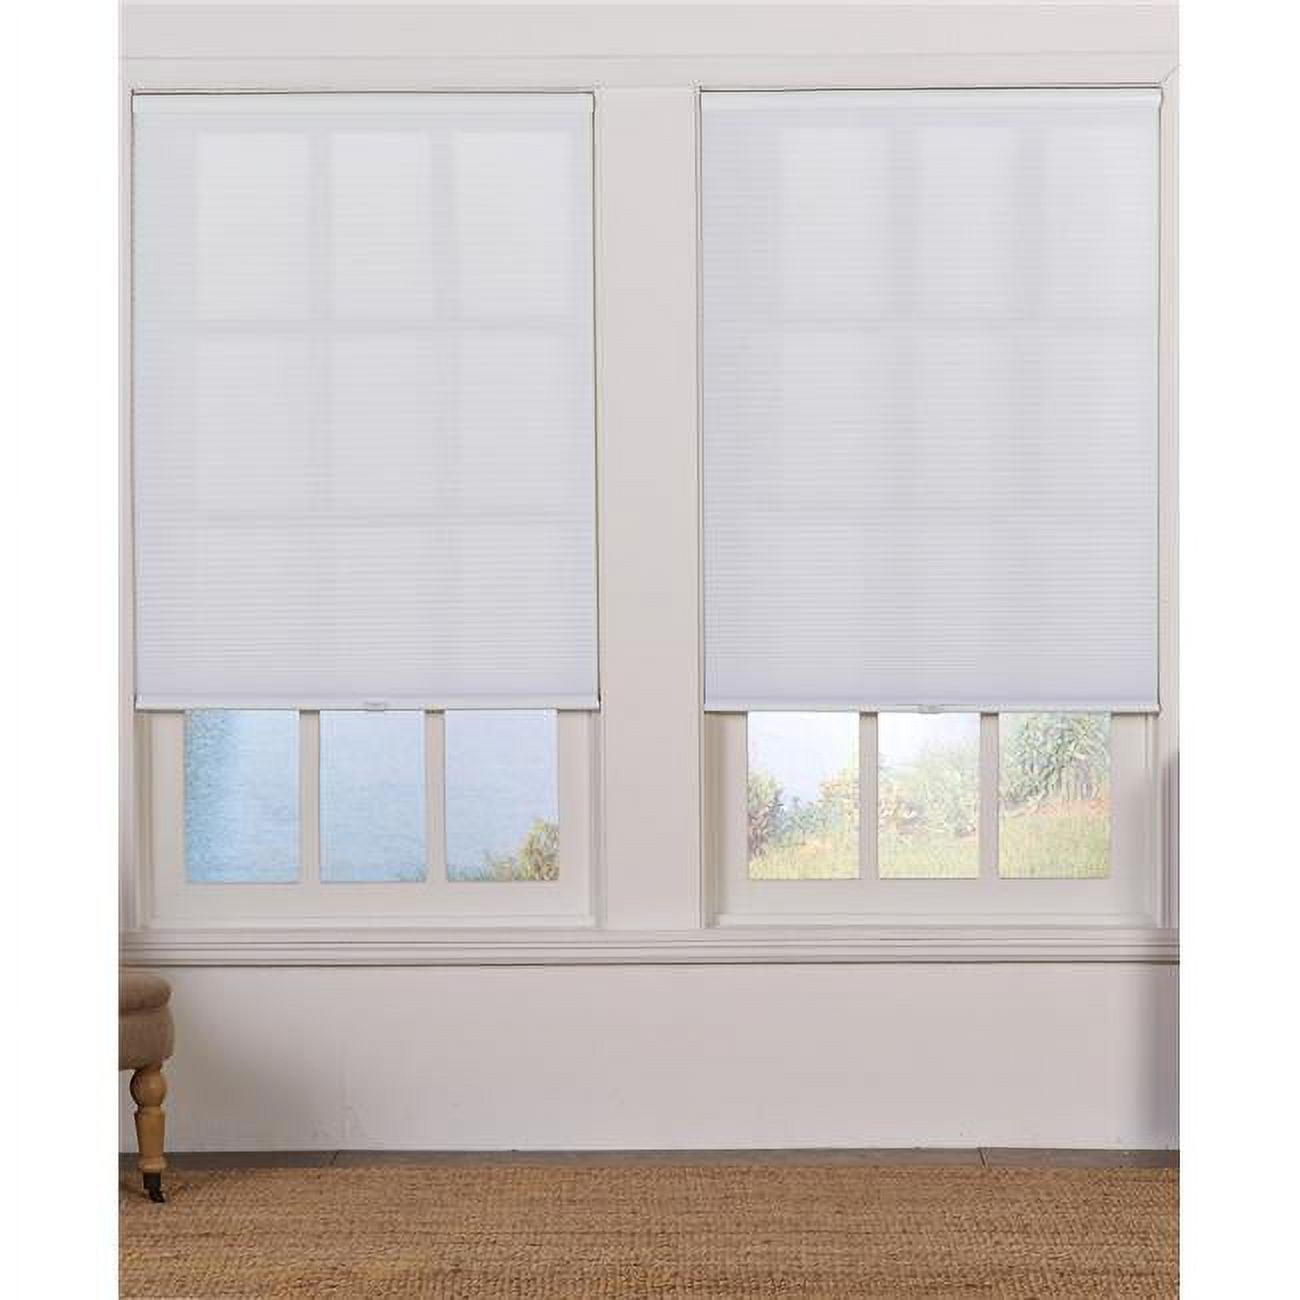 Ubc30x72wt Cordless Light Filtering Cellular Shade, White - 30 X 72 In.